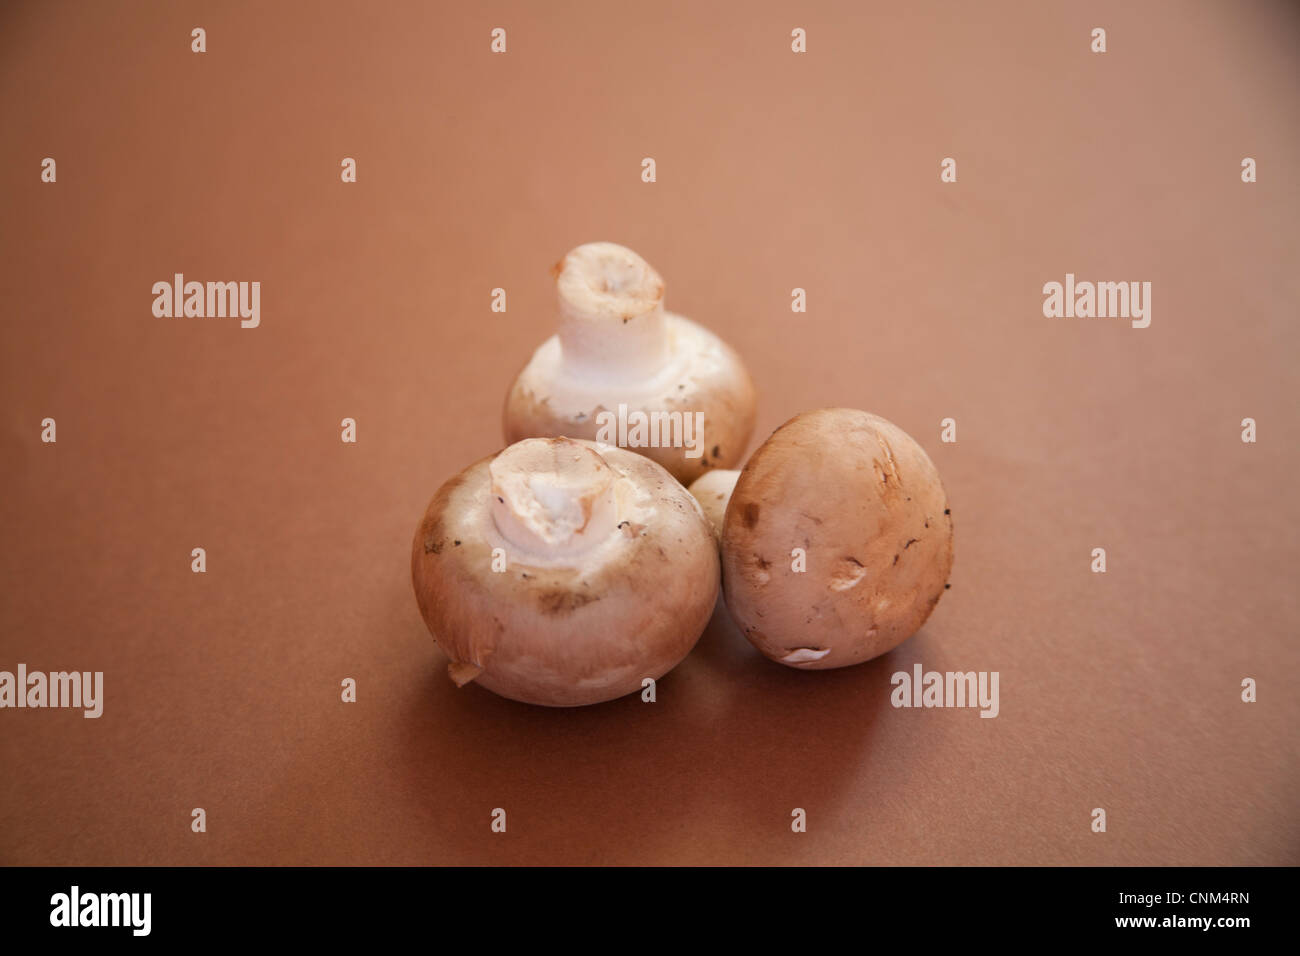 Three chestnut mushrooms on a brown background Stock Photo